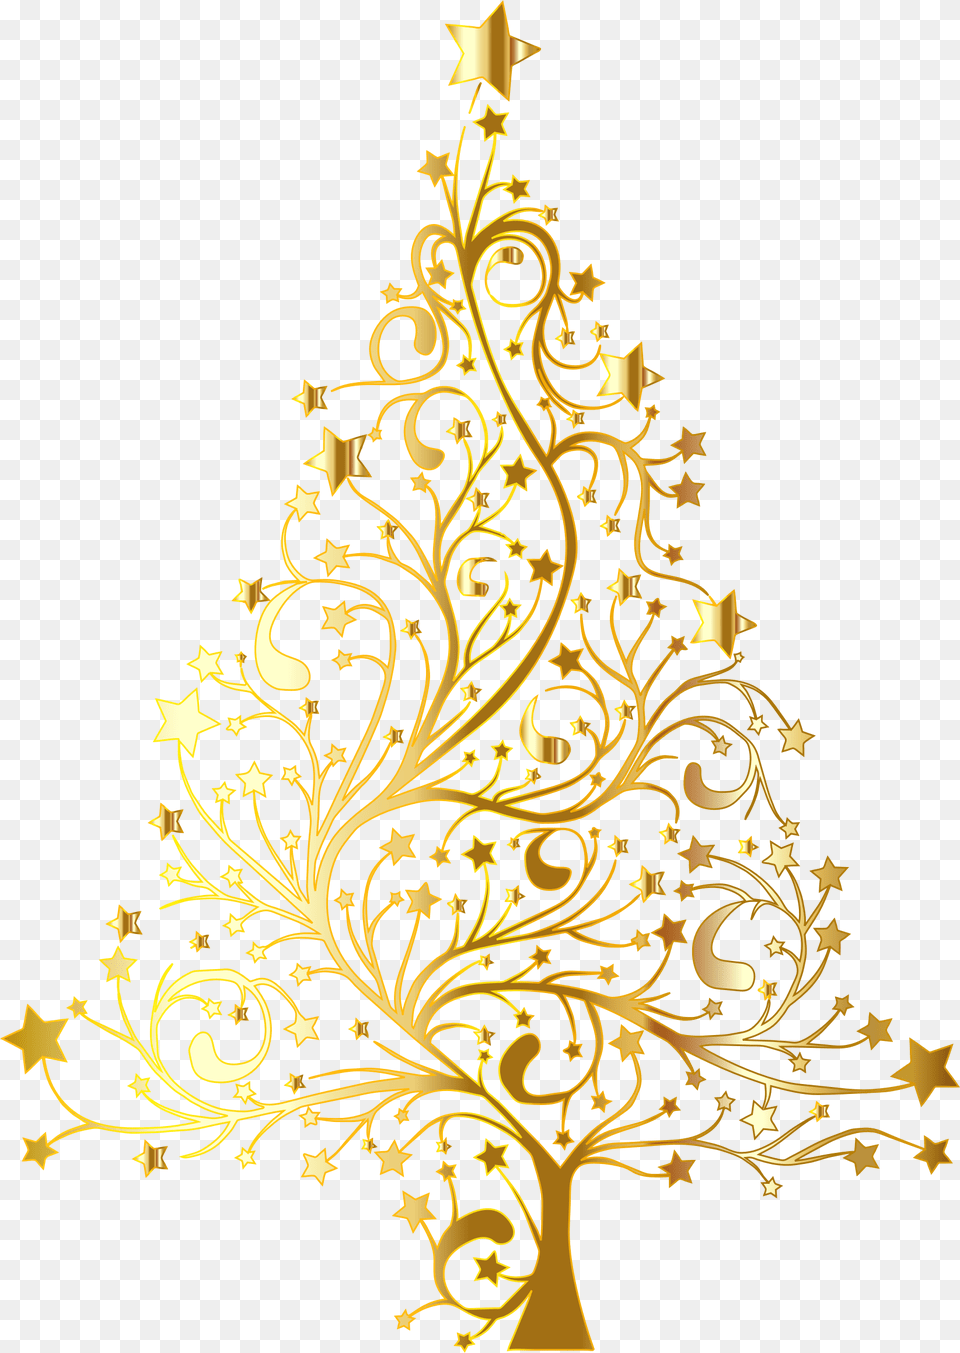 Starry Christmas Tree Gold No Background Clip Arts Gold Christmas Tree Vector, Art, Graphics, Floral Design, Pattern Png